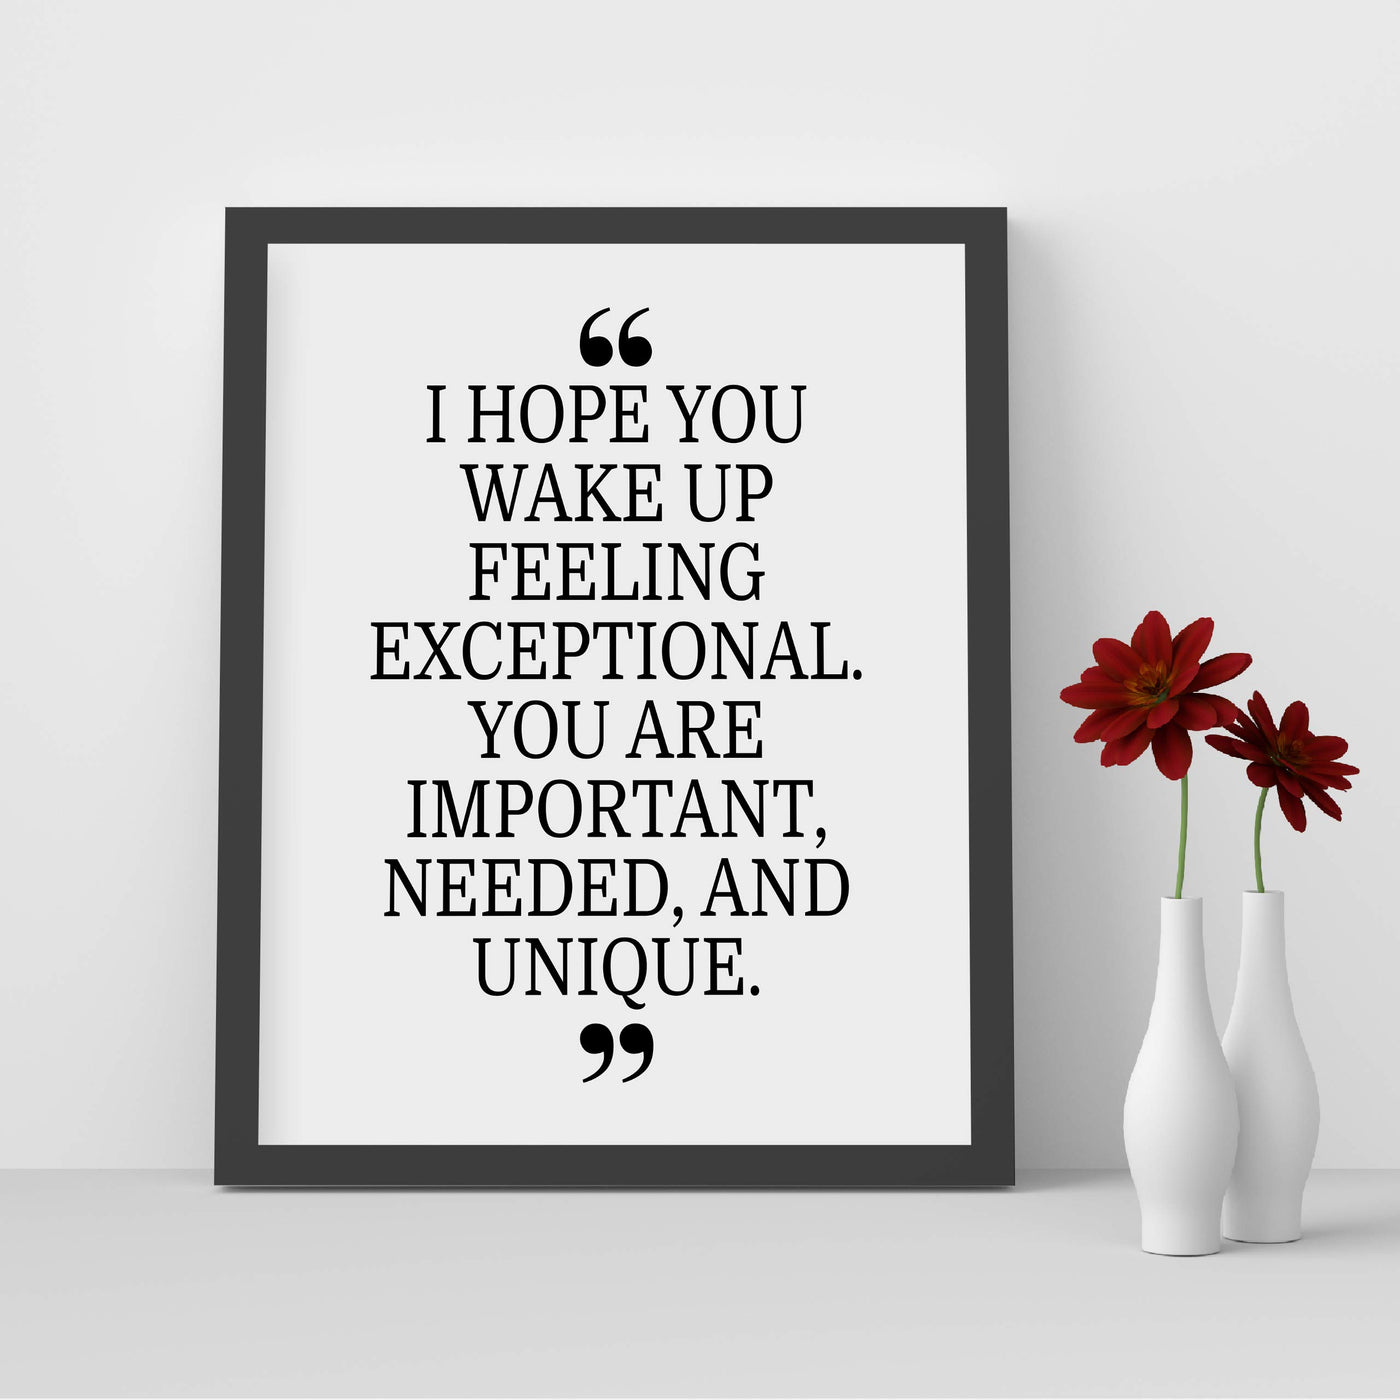 You Are Important, Needed, and Unique Motivational Quotes Wall Art -8 x 10" Inspirational Poster Print-Ready to Frame. Modern Typographic Design. Positive Home-Office-Classroom-Dorm Decor!